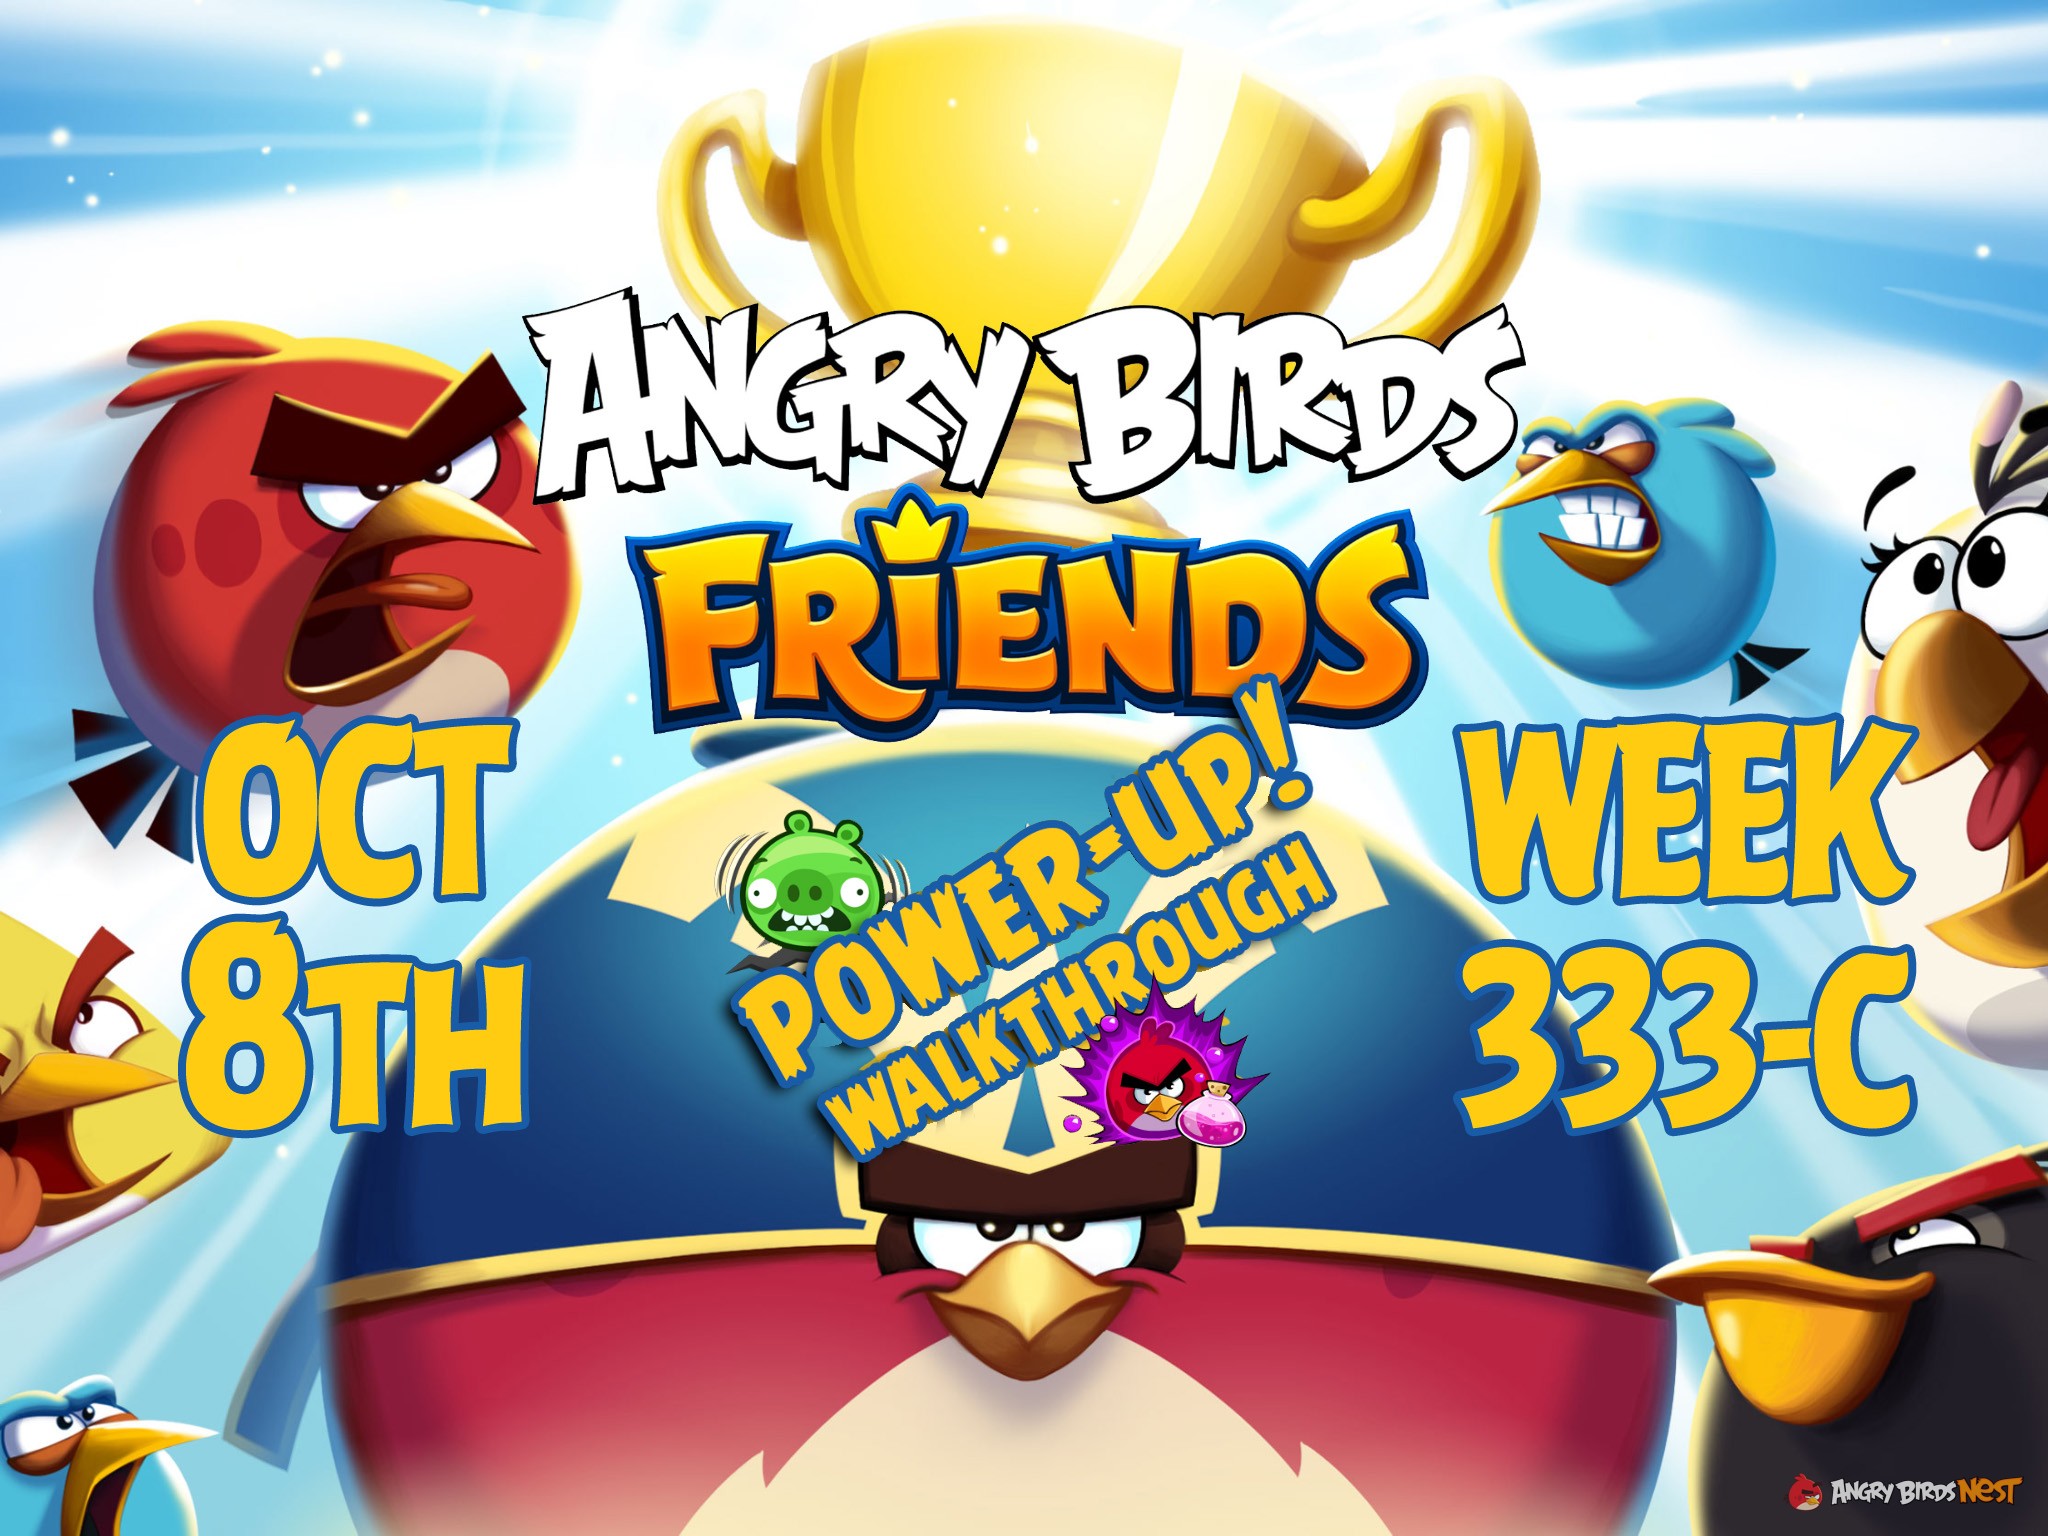 Angry-Birds-Friends-Tournament-Week-333-C-Feature-Image-PU